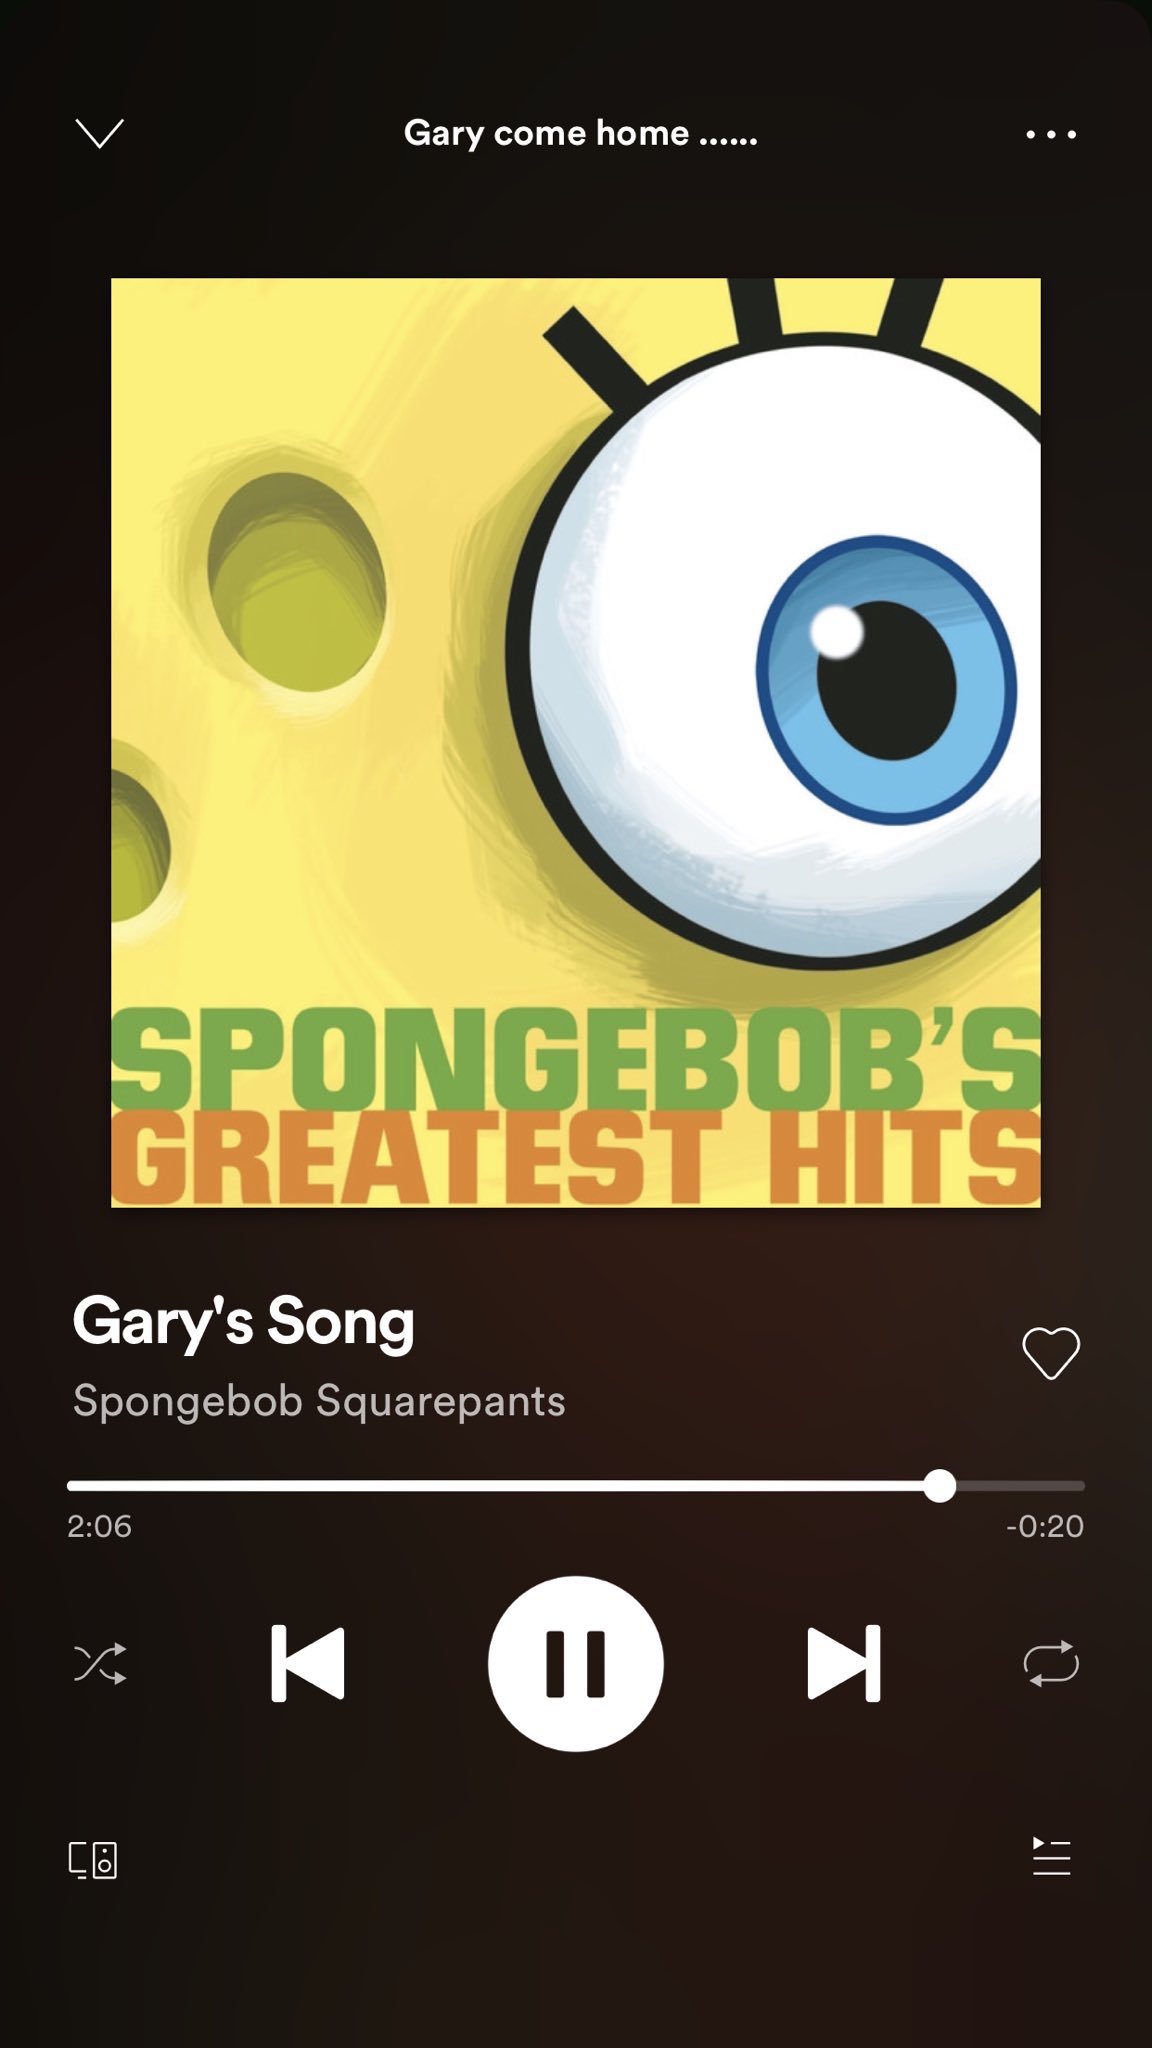 Hulk Logan on X: Day 10 🎧 A song that makes you sad Gary's song